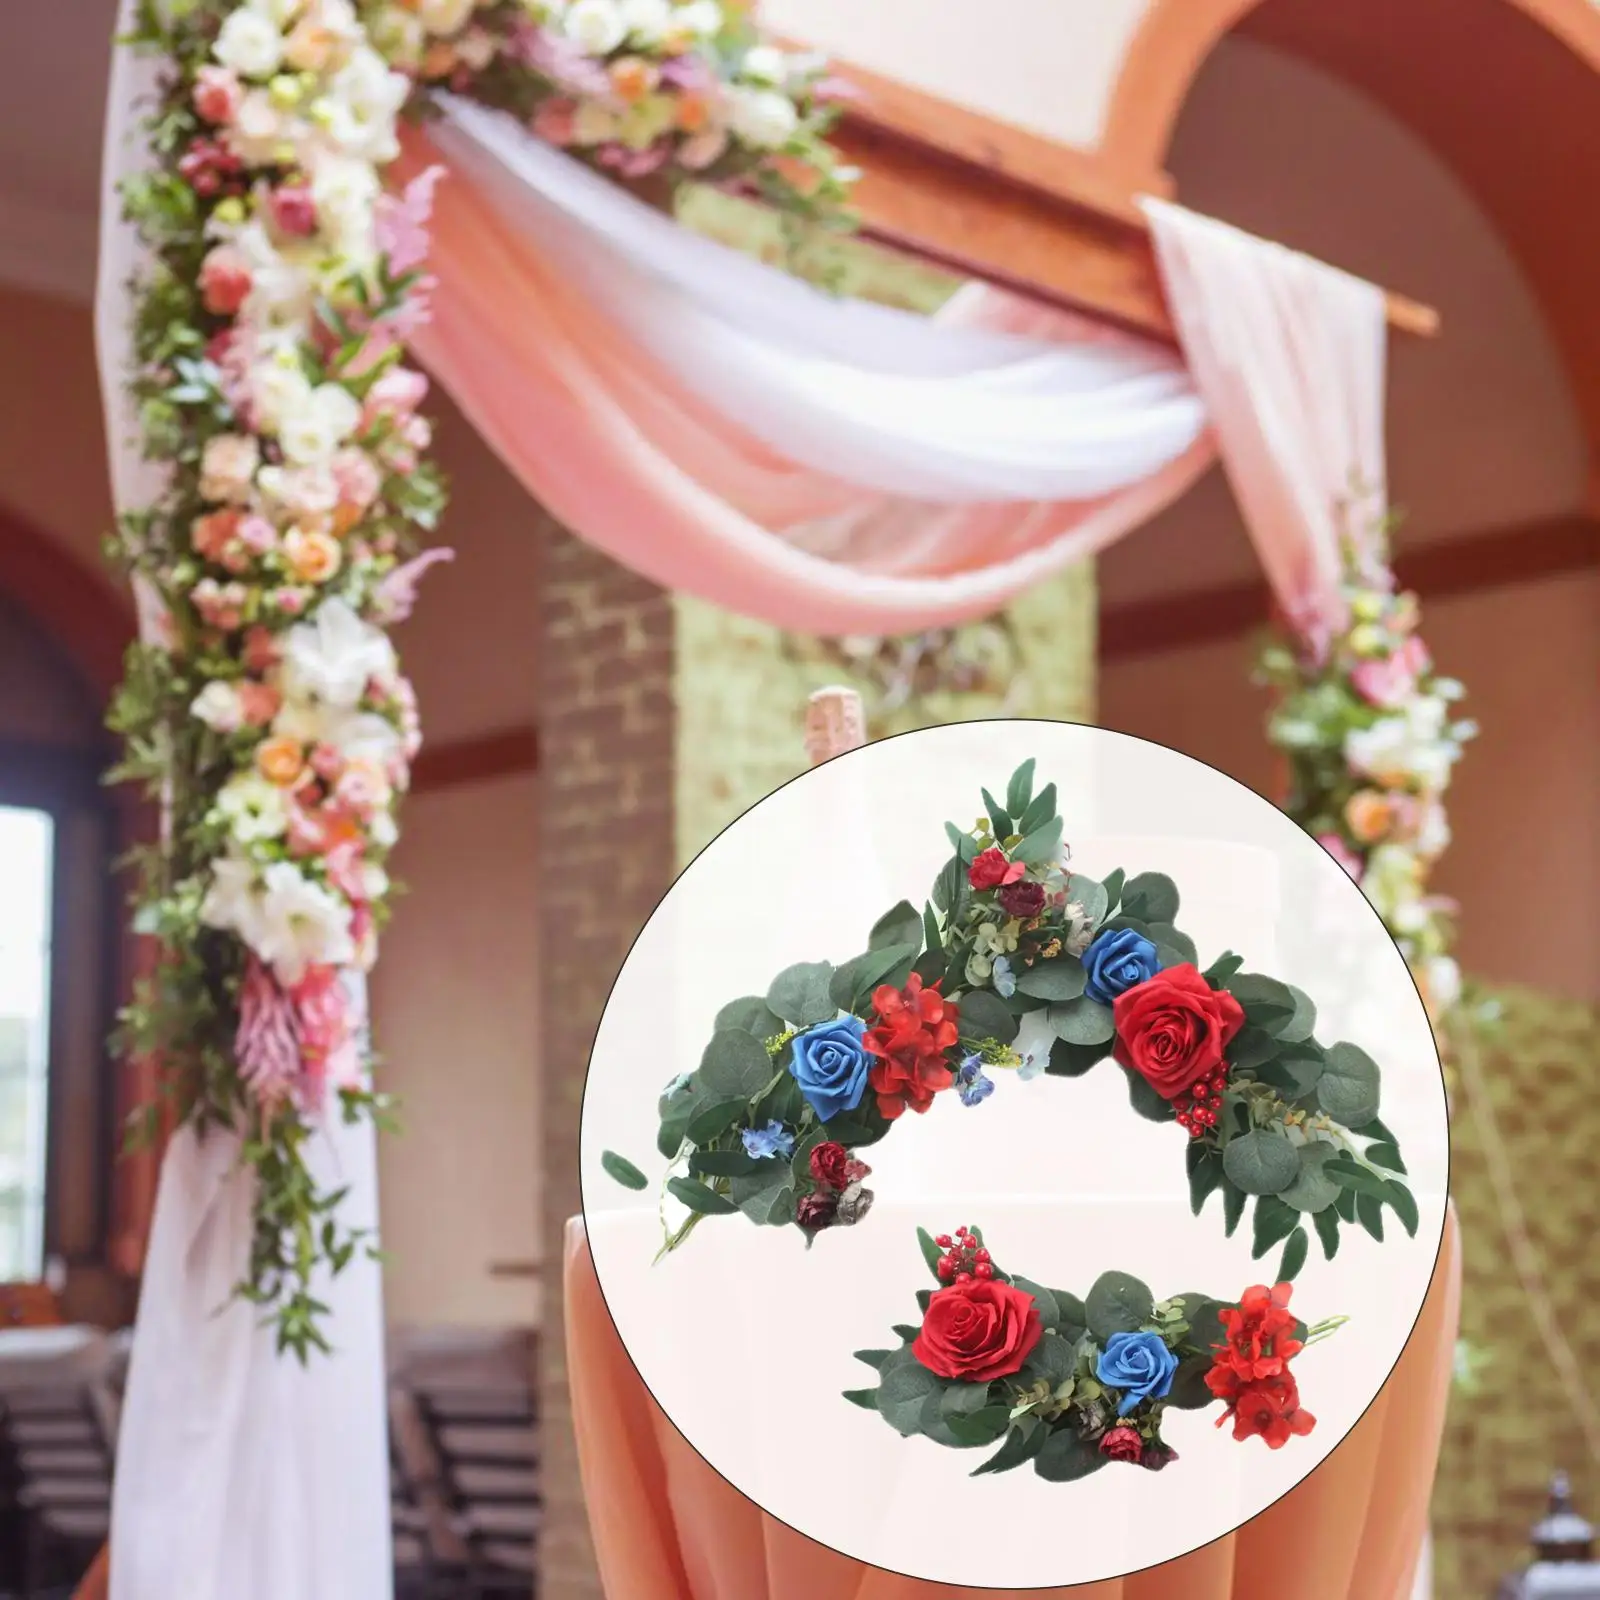 2Pcs Silk Wedding Arch Flowers Kit Display Fake Plant Artificial Flowers for Ceremony Window Backdrop Reception Home Decor